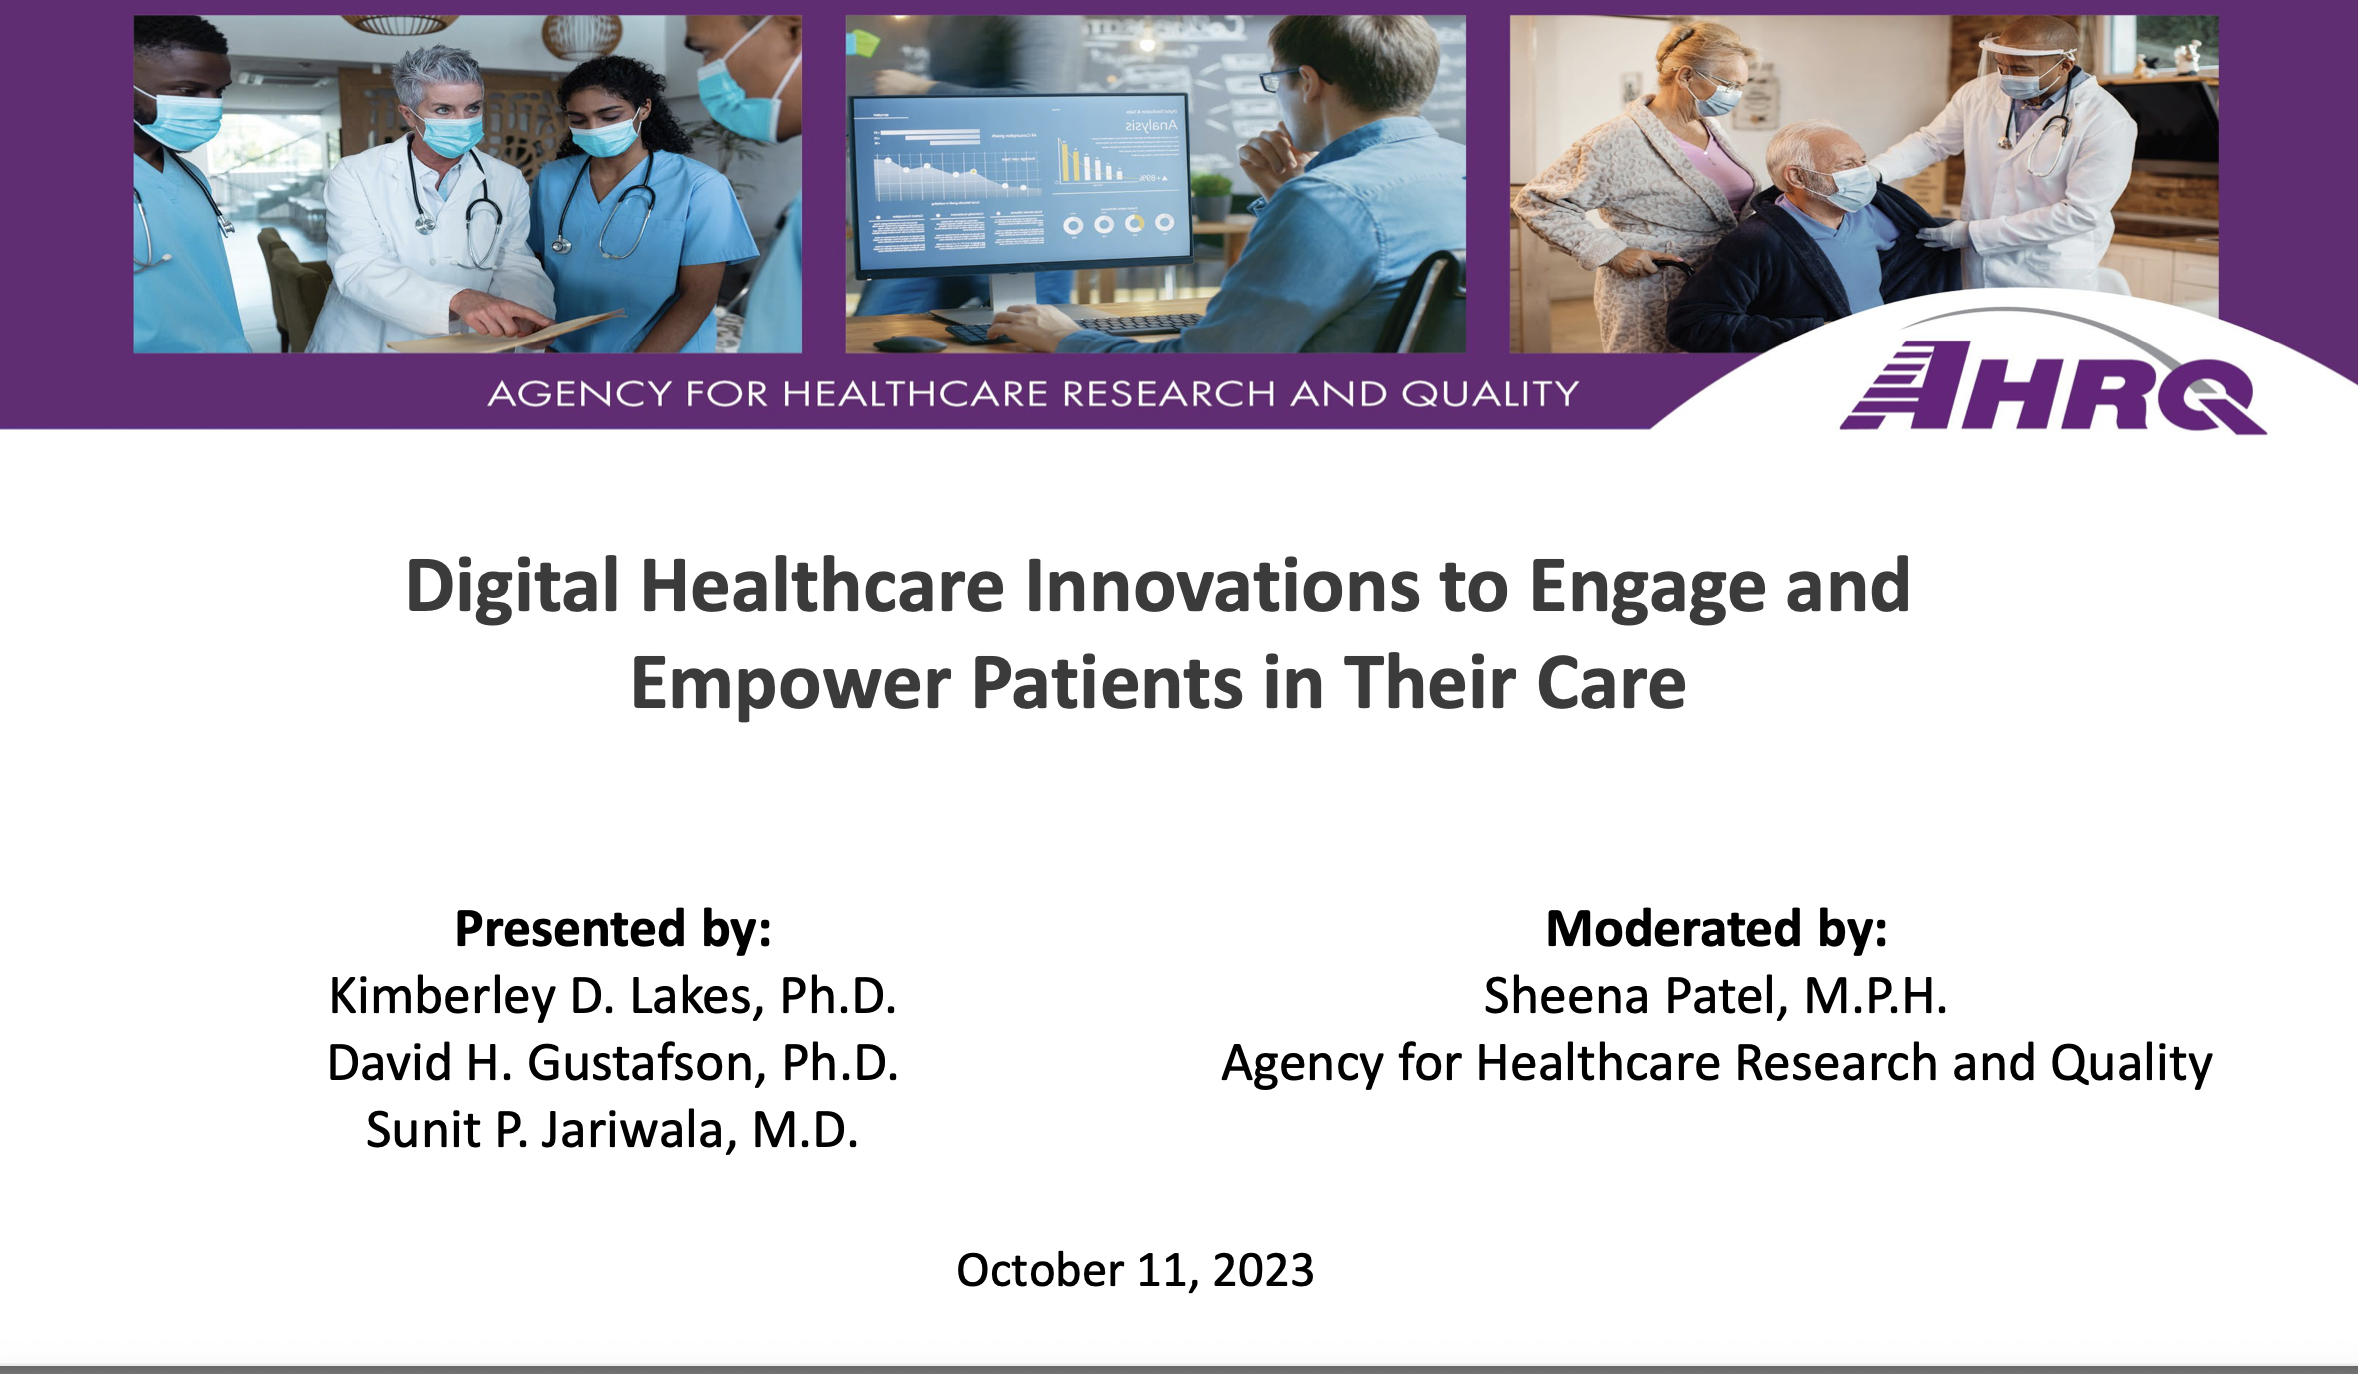 Agency for Healthcare Research and Quality webinar presentation slide